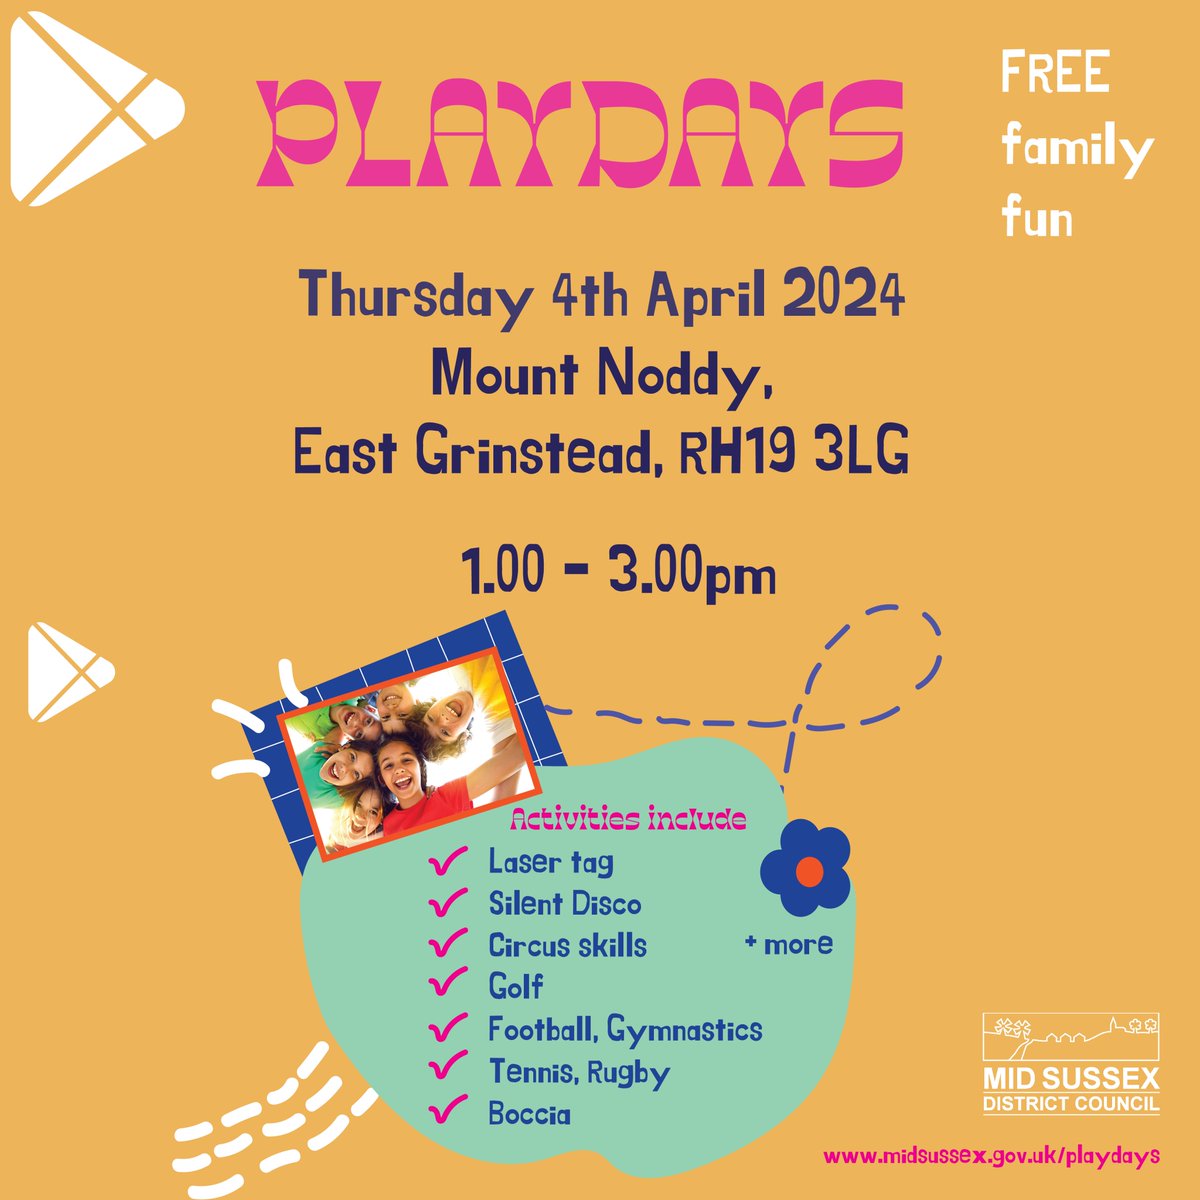 Our FREE Play Days are back for the Easter holidays, kicking off tomorrow at Mount Noddy in East Grinstead. No need to book, just turn up and enjoy free family fun! To find out more and see all upcoming dates, please visit: midsussex.gov.uk/.../mid-sussex…